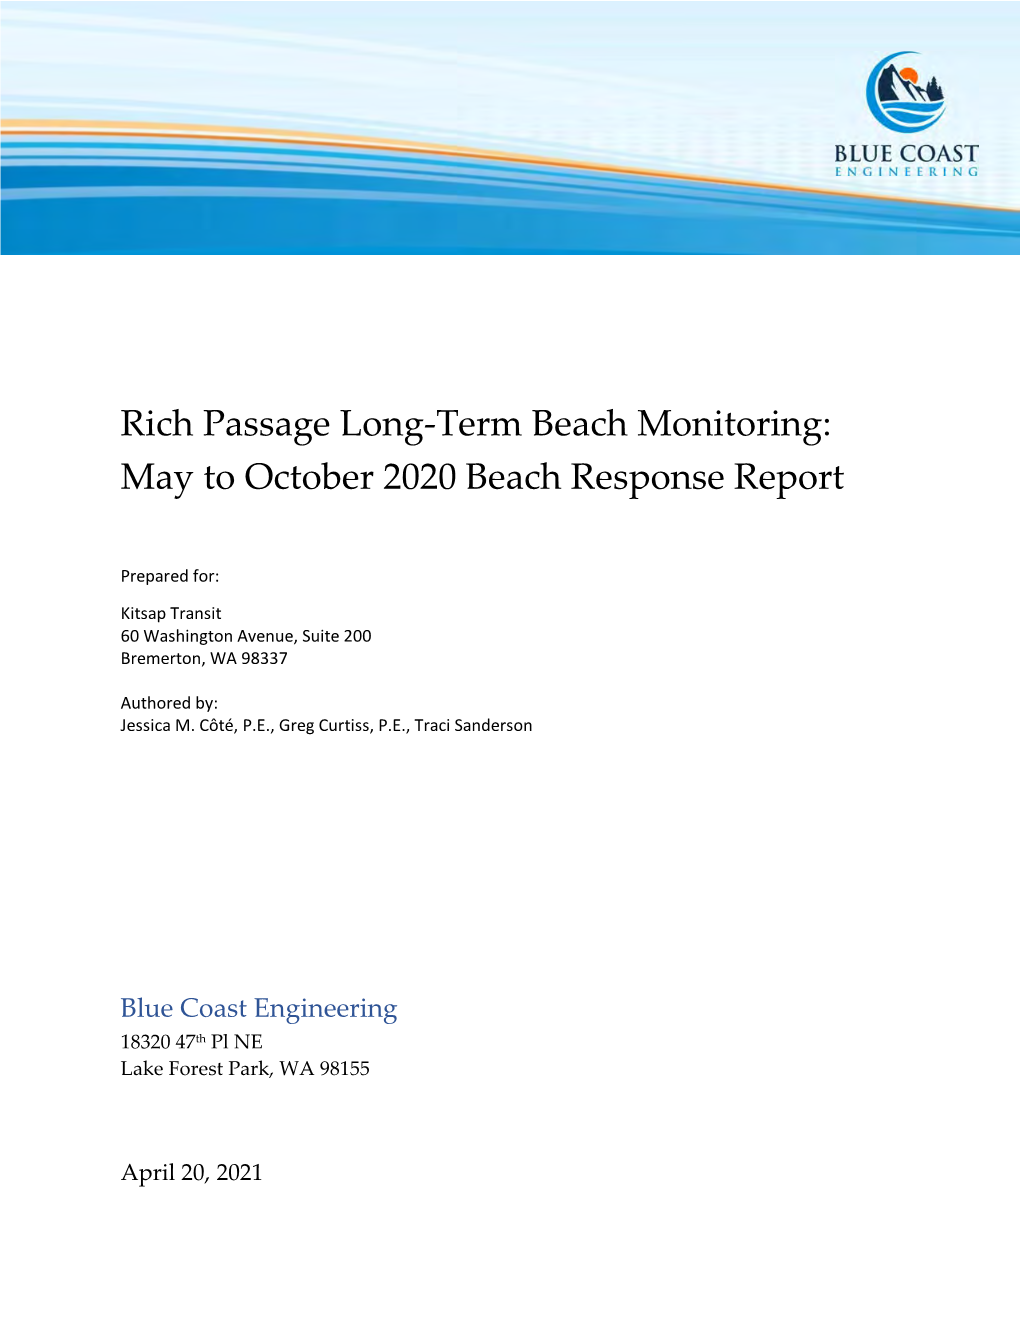 Rich Passage Long-Term Beach Monitoring: May to October 2020 Beach Response Report